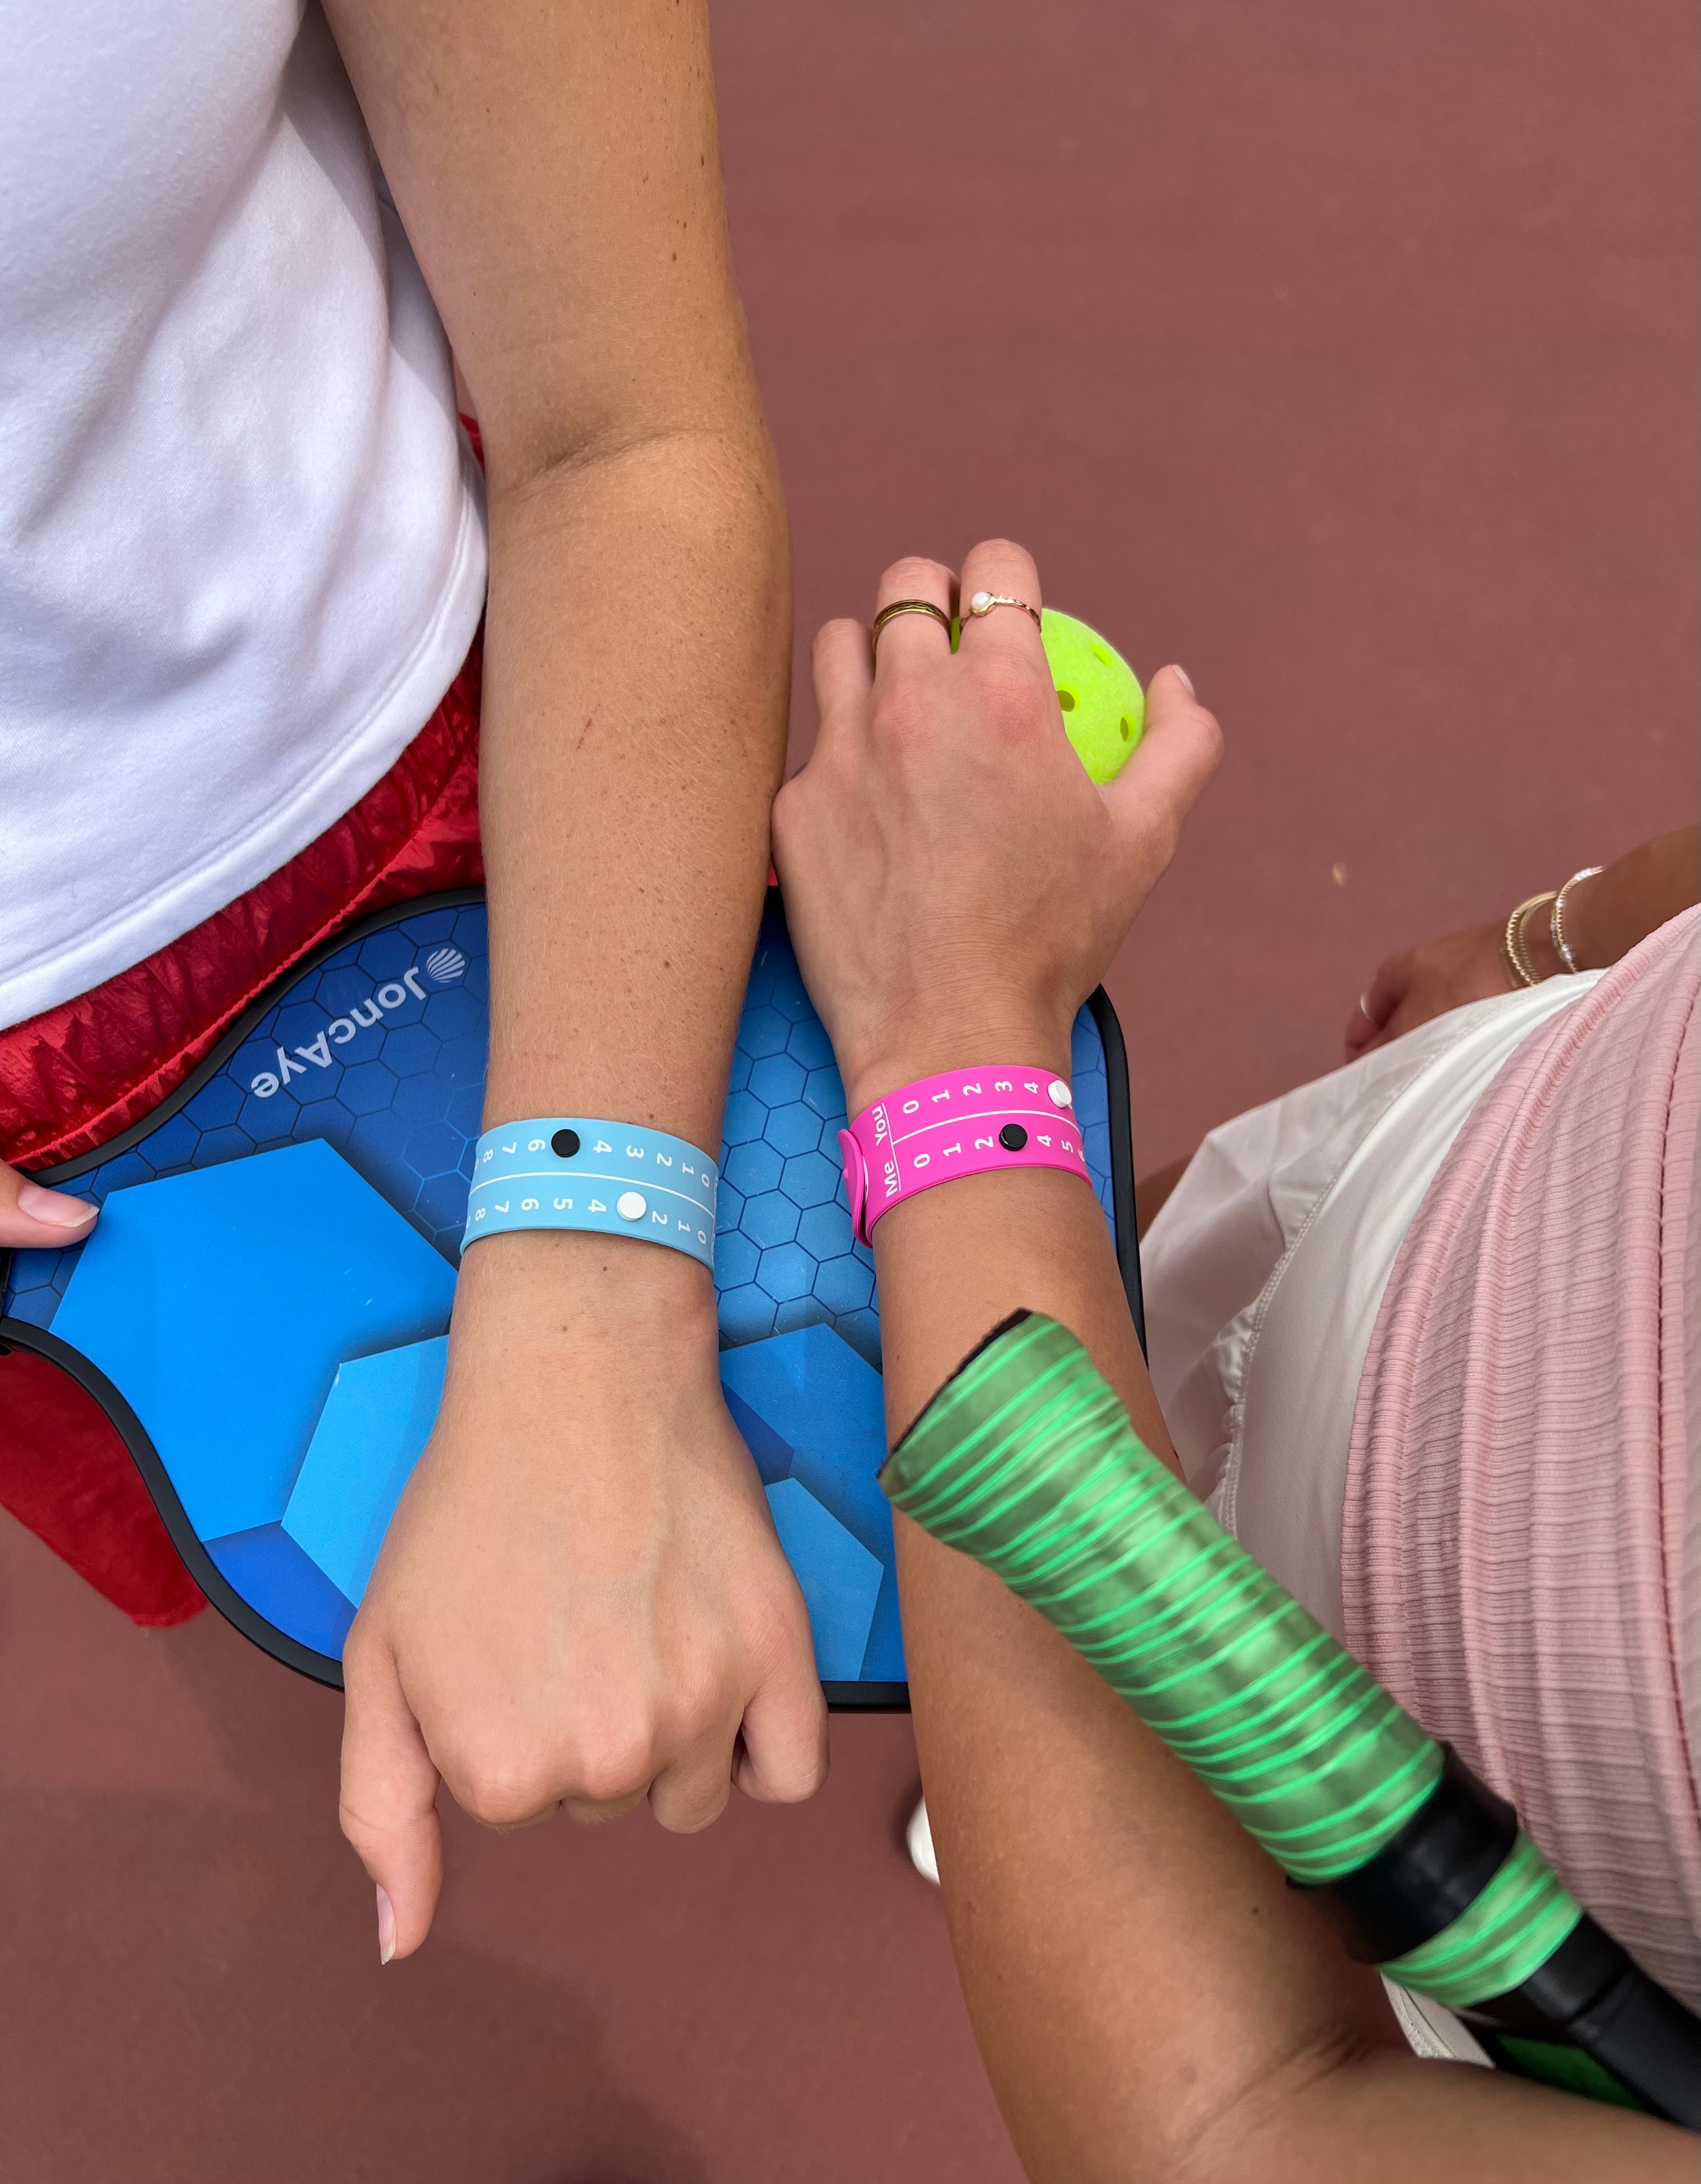 Load video: Pickleball Point Bands are the best pickleball scorekeeper, scoring band and scoreband worn on your wrist to keep score and track the server number while playing pickleball